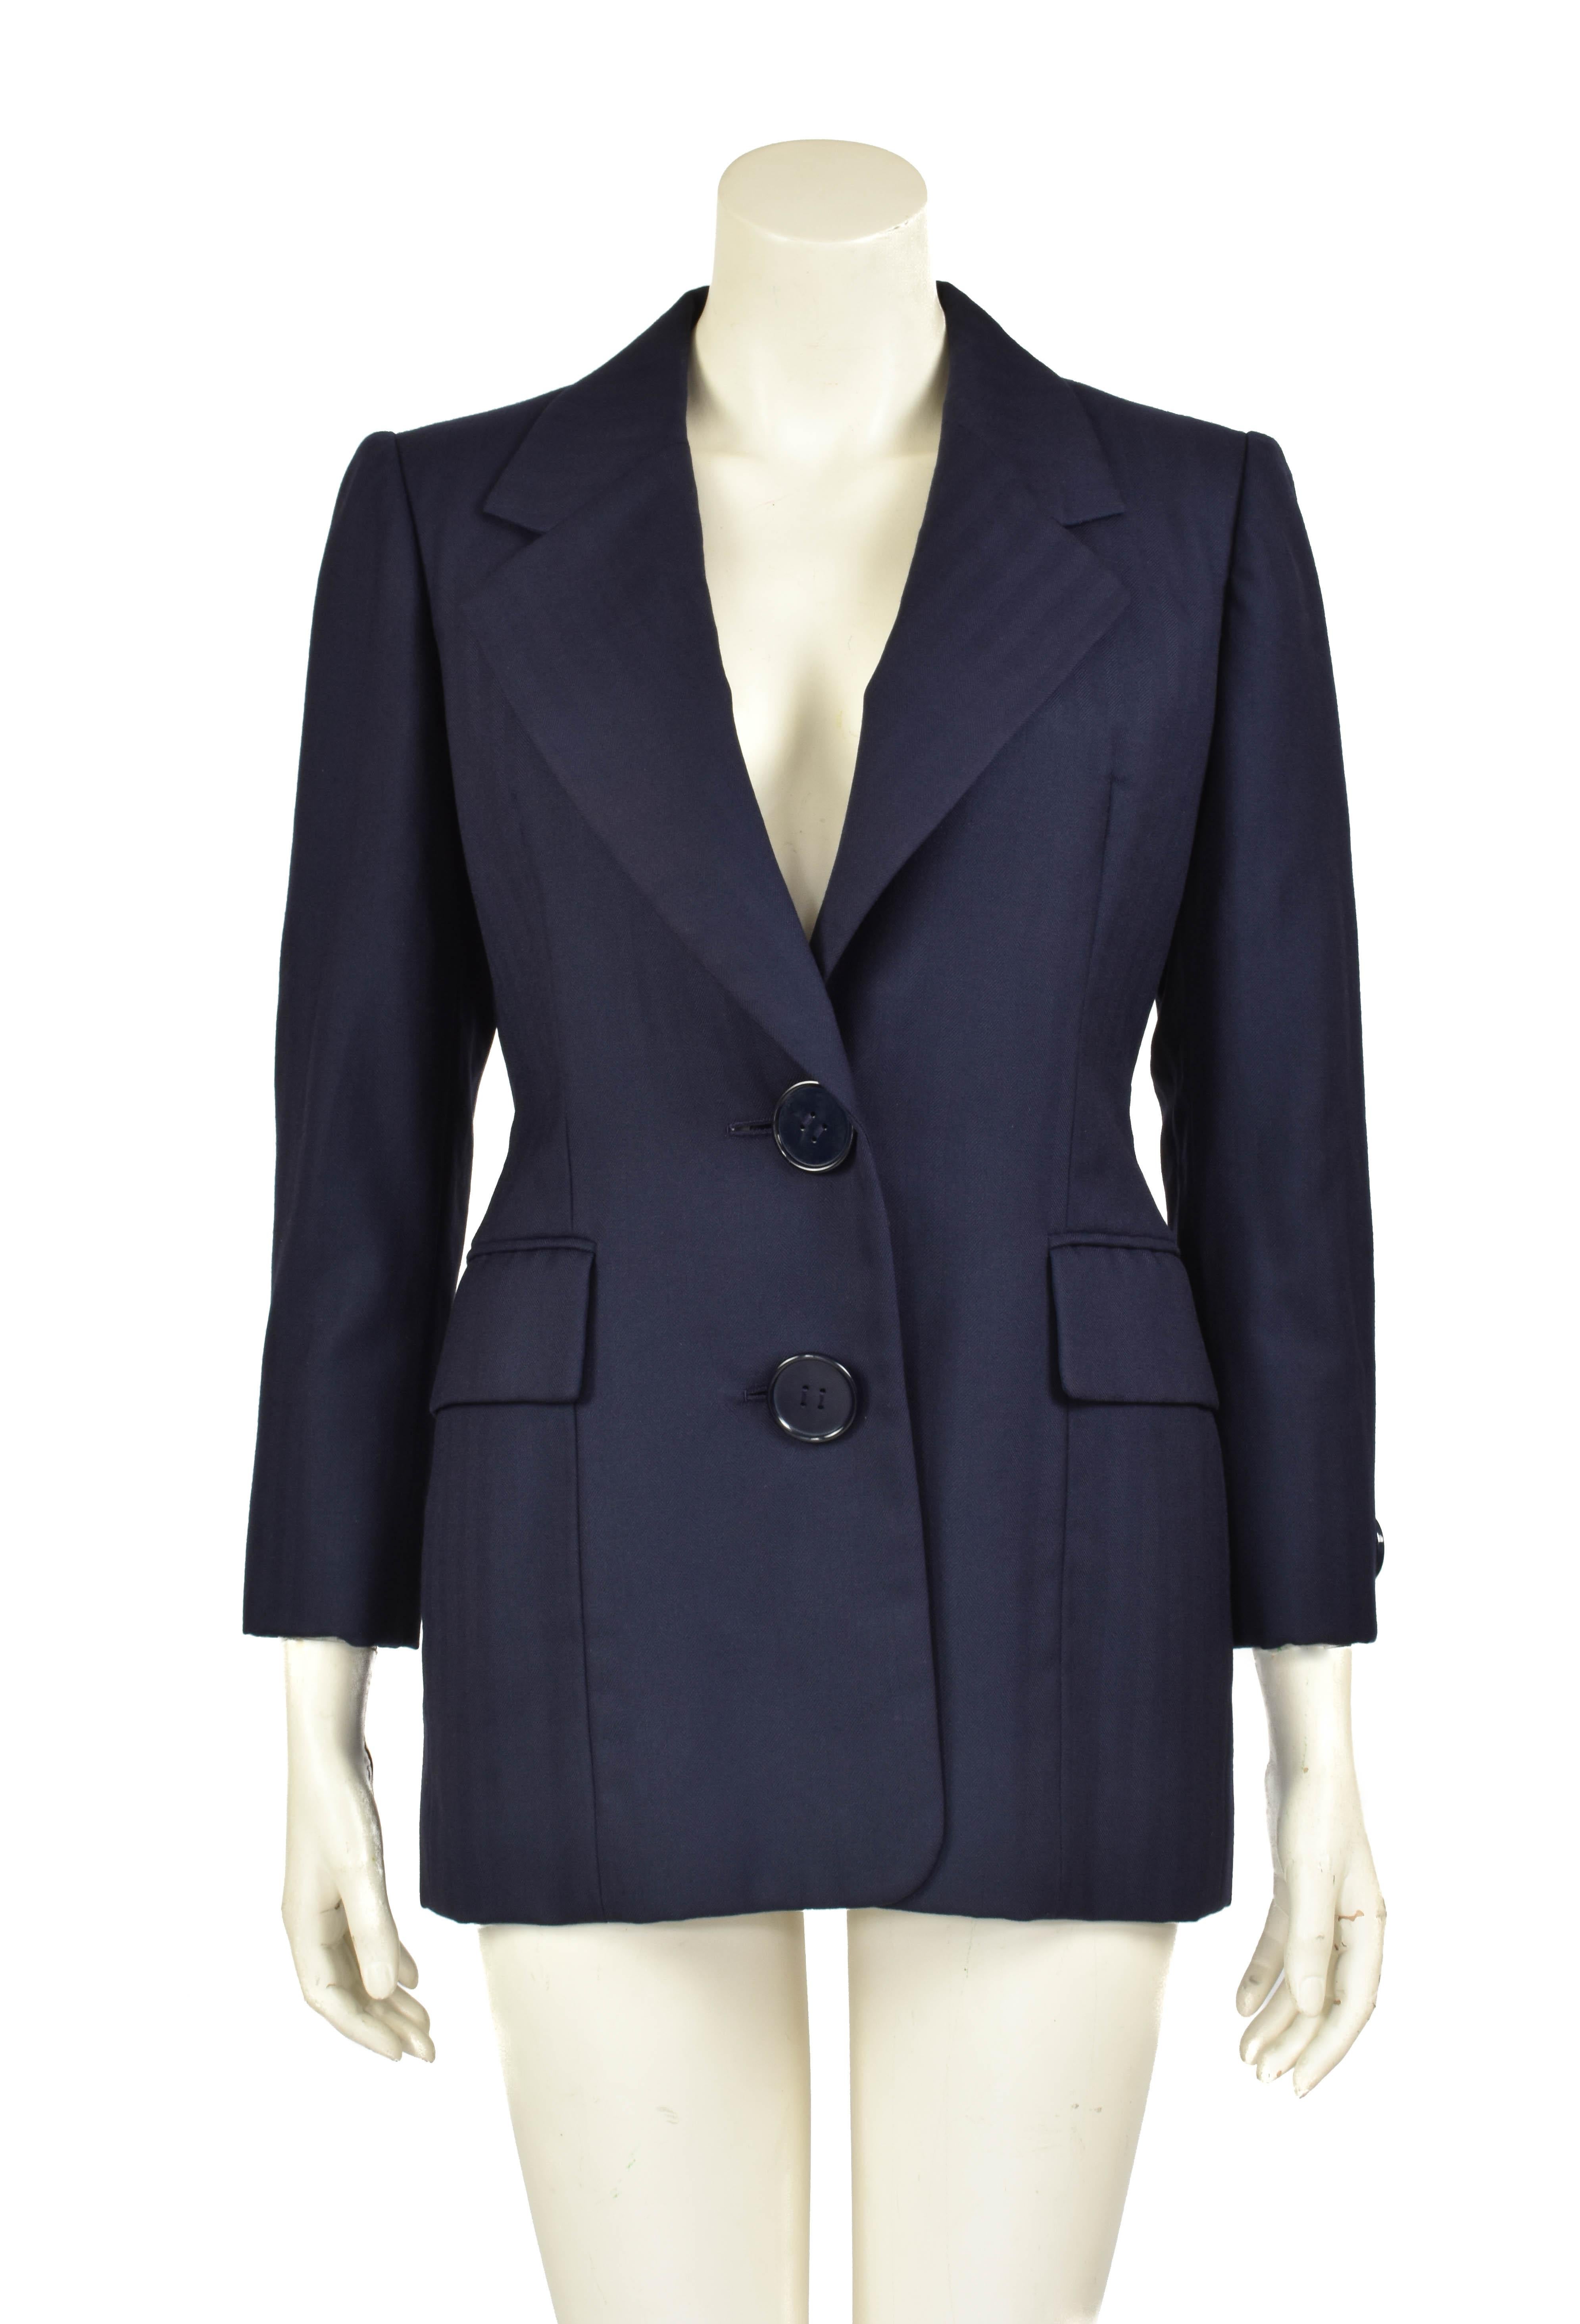 This beautiful jacket is a Christian Dior Haute Couture piece from the 1990's. It is has a fantastic shade of blue and extra large buttons. The wool shell is like new and there are only minor flaws on the silk lining. 

Size: Approximately S / US 6